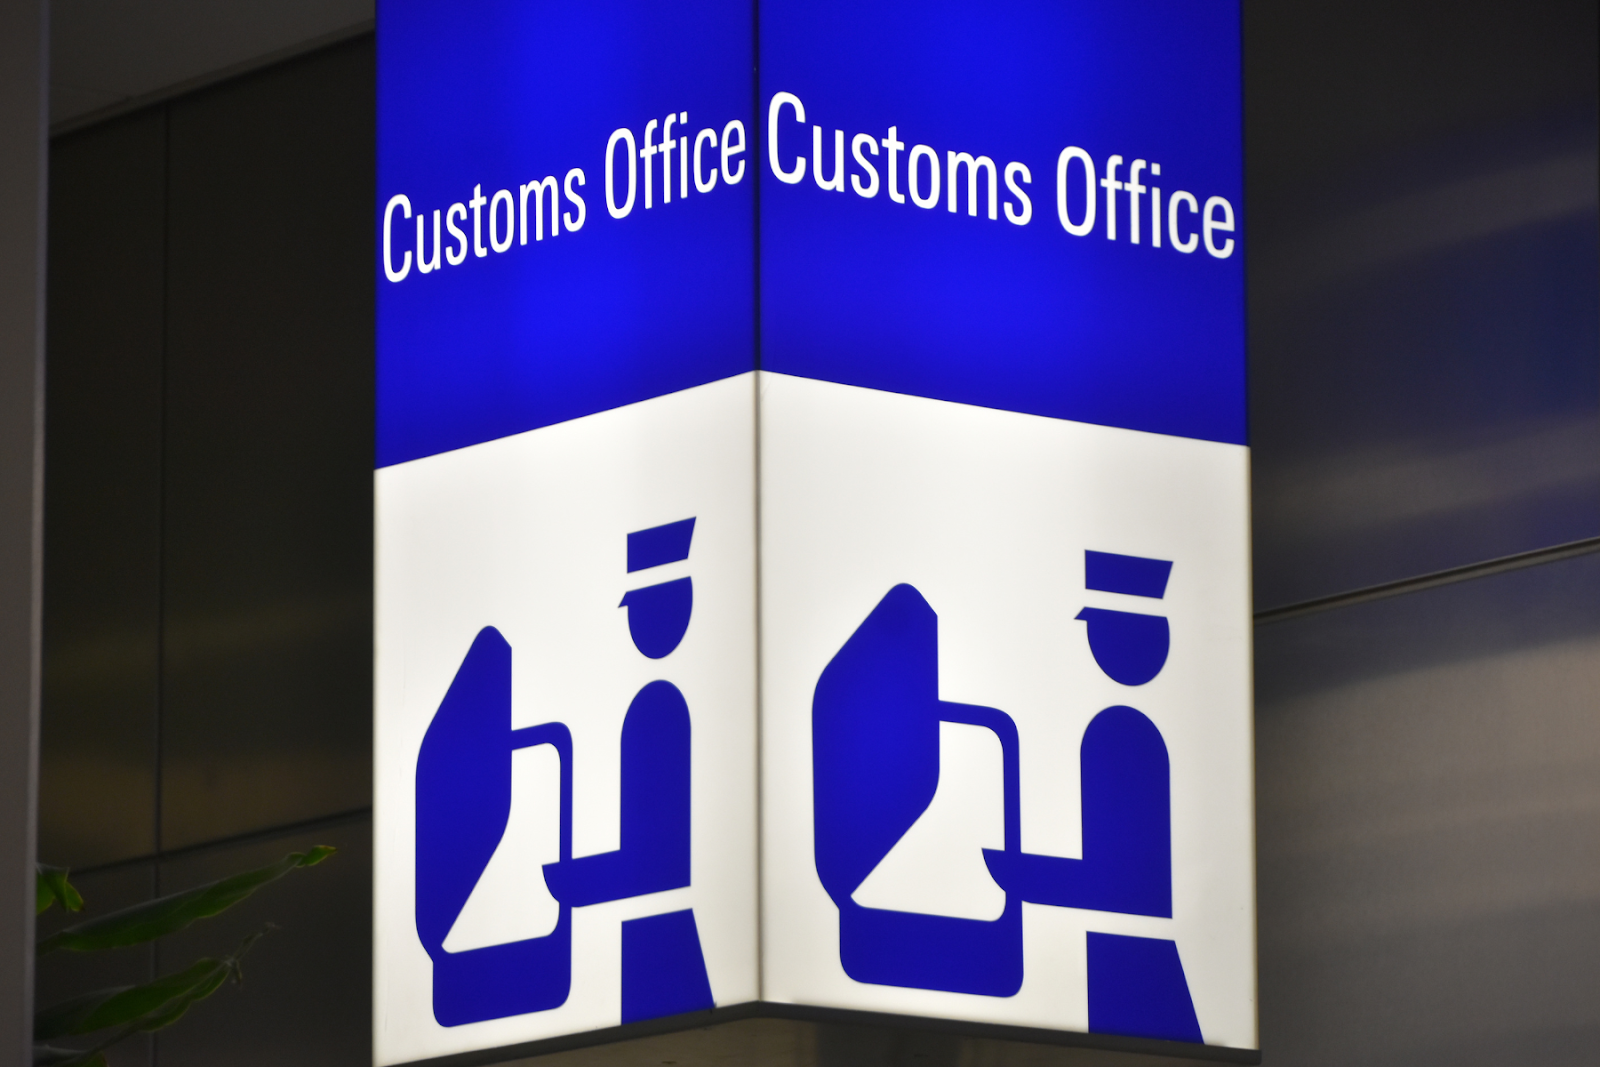 This image displays the text customs office and an icon/image to represent it.